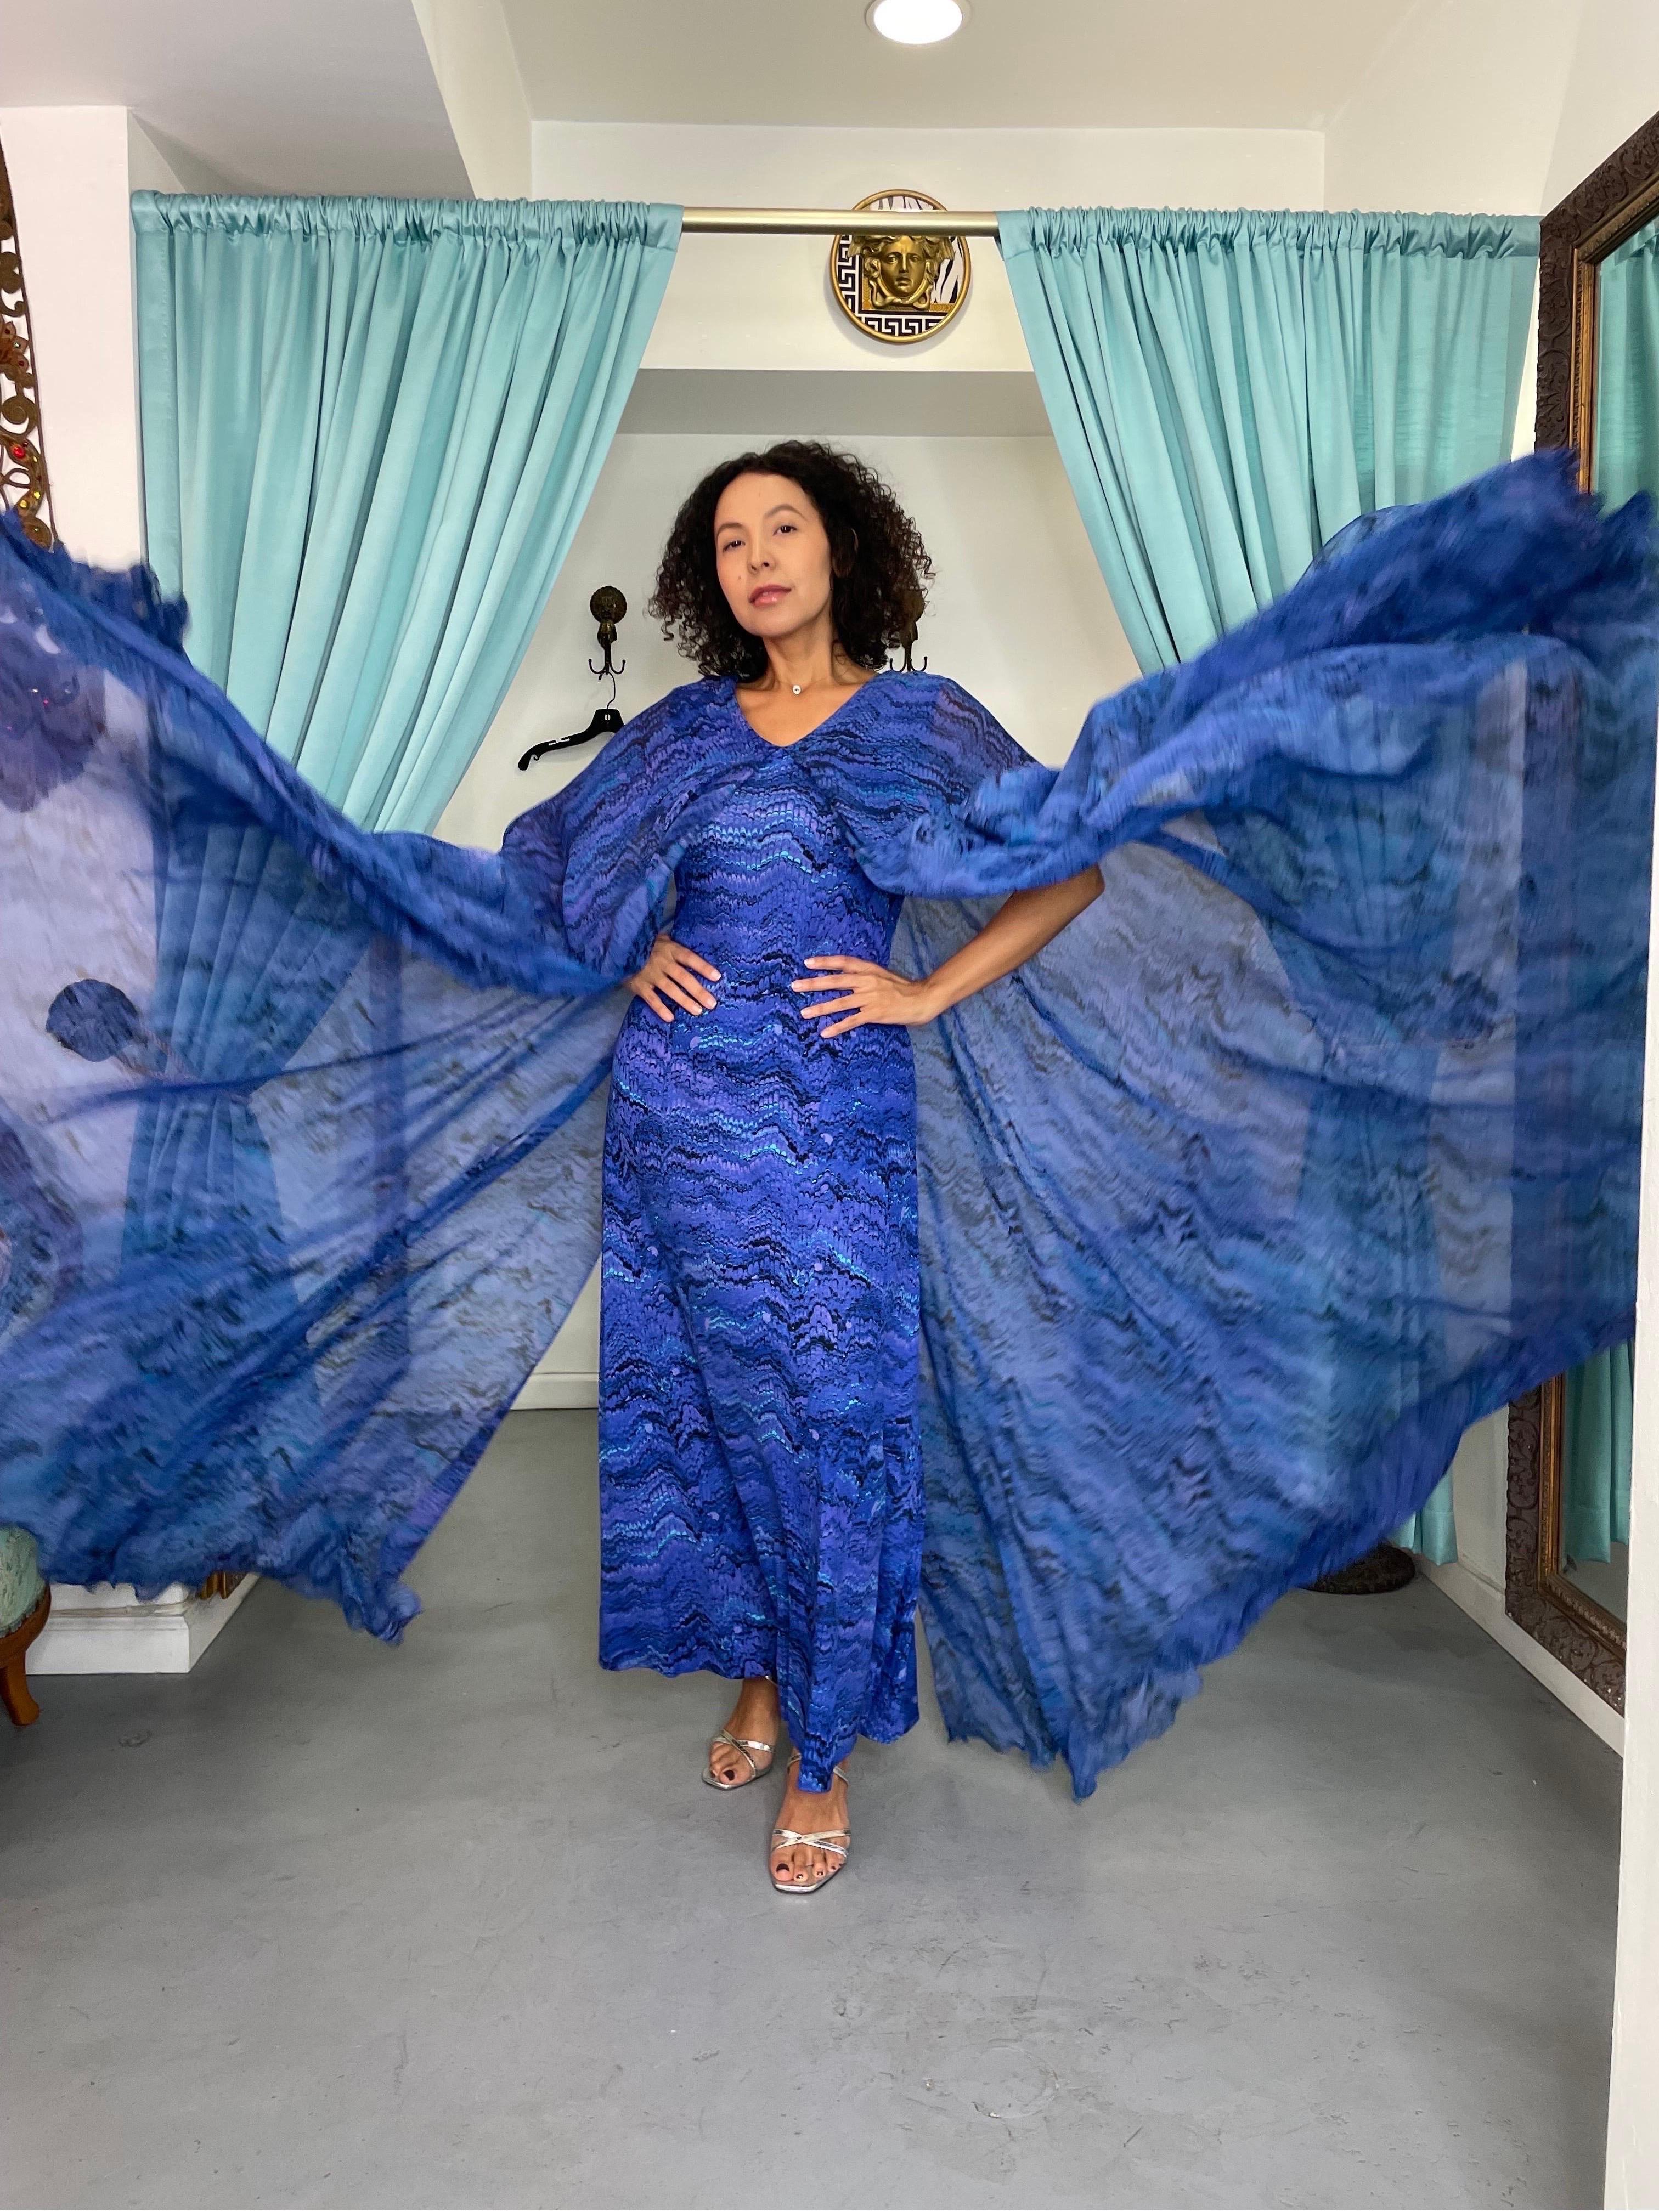 Sensational La Mendola designer caftan gown dating by the the early 1970's. This is a perfect example of the highly collectible and rare Italian couture house who was adored by the likes of Elizabeth Taylor and Rita Hayworth. The fabric used for